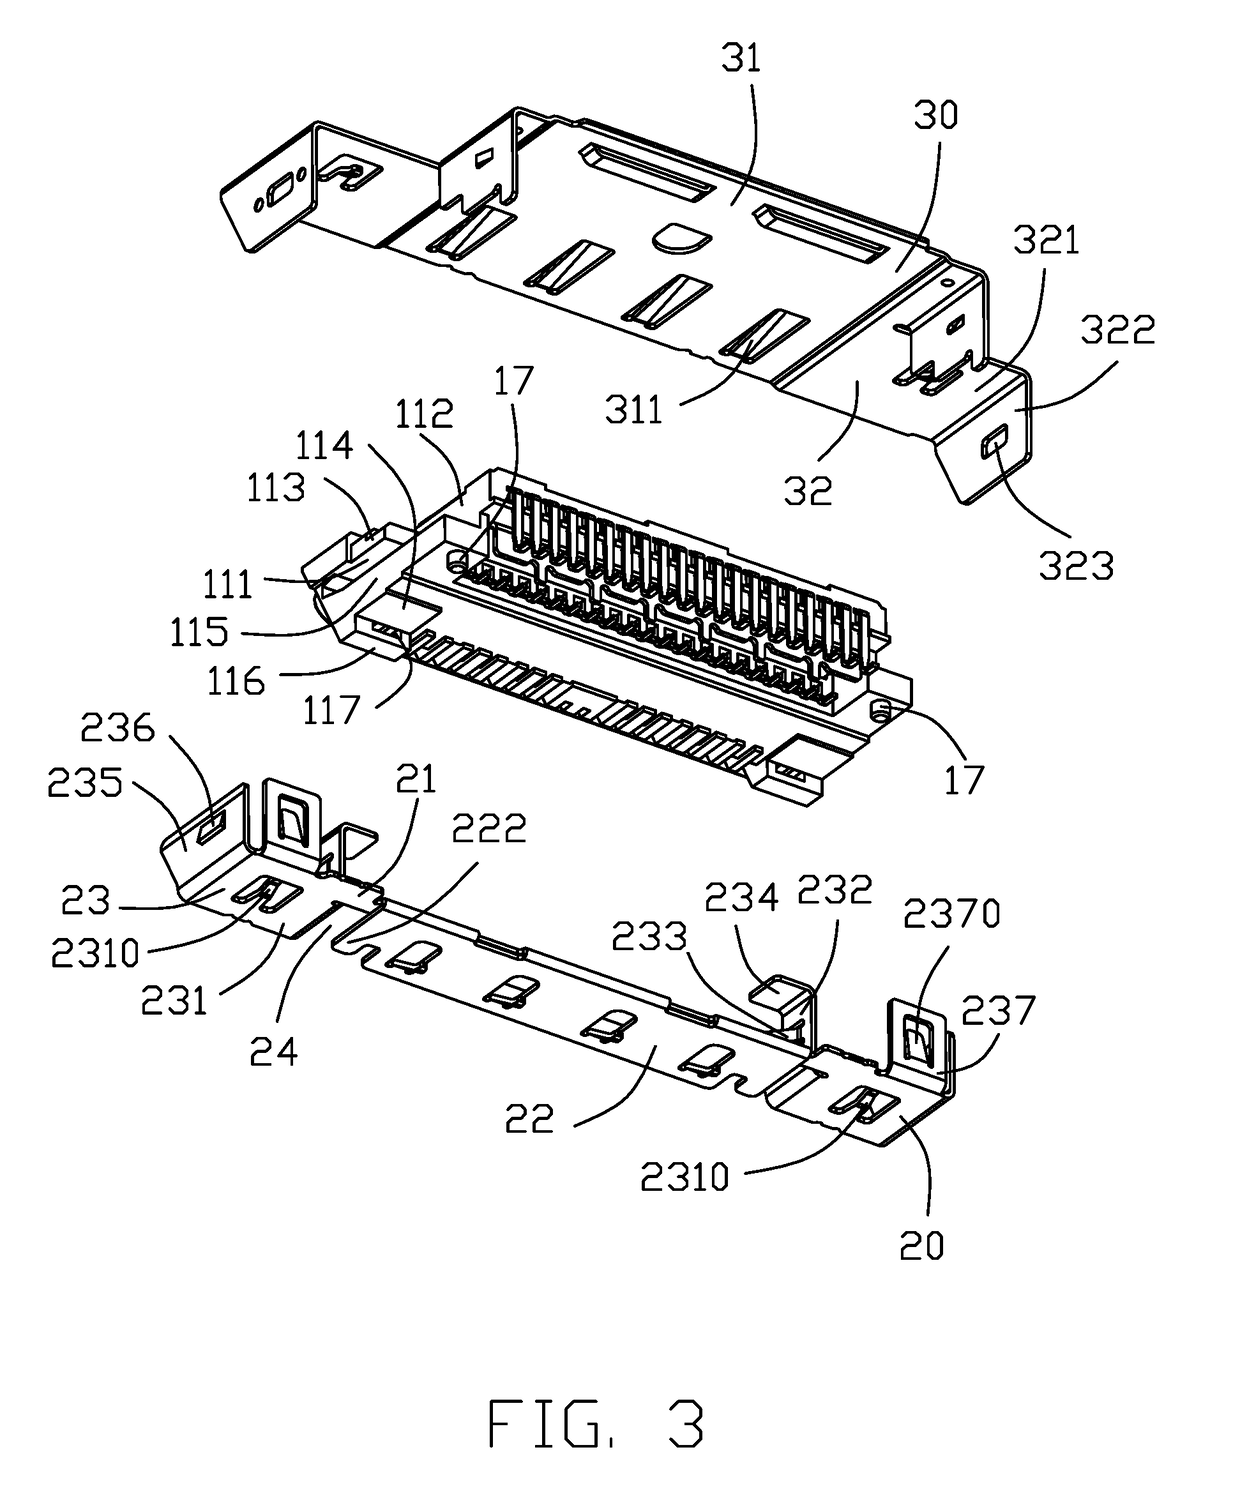 Electrical connector having shell retention structgure and method of assembling the same